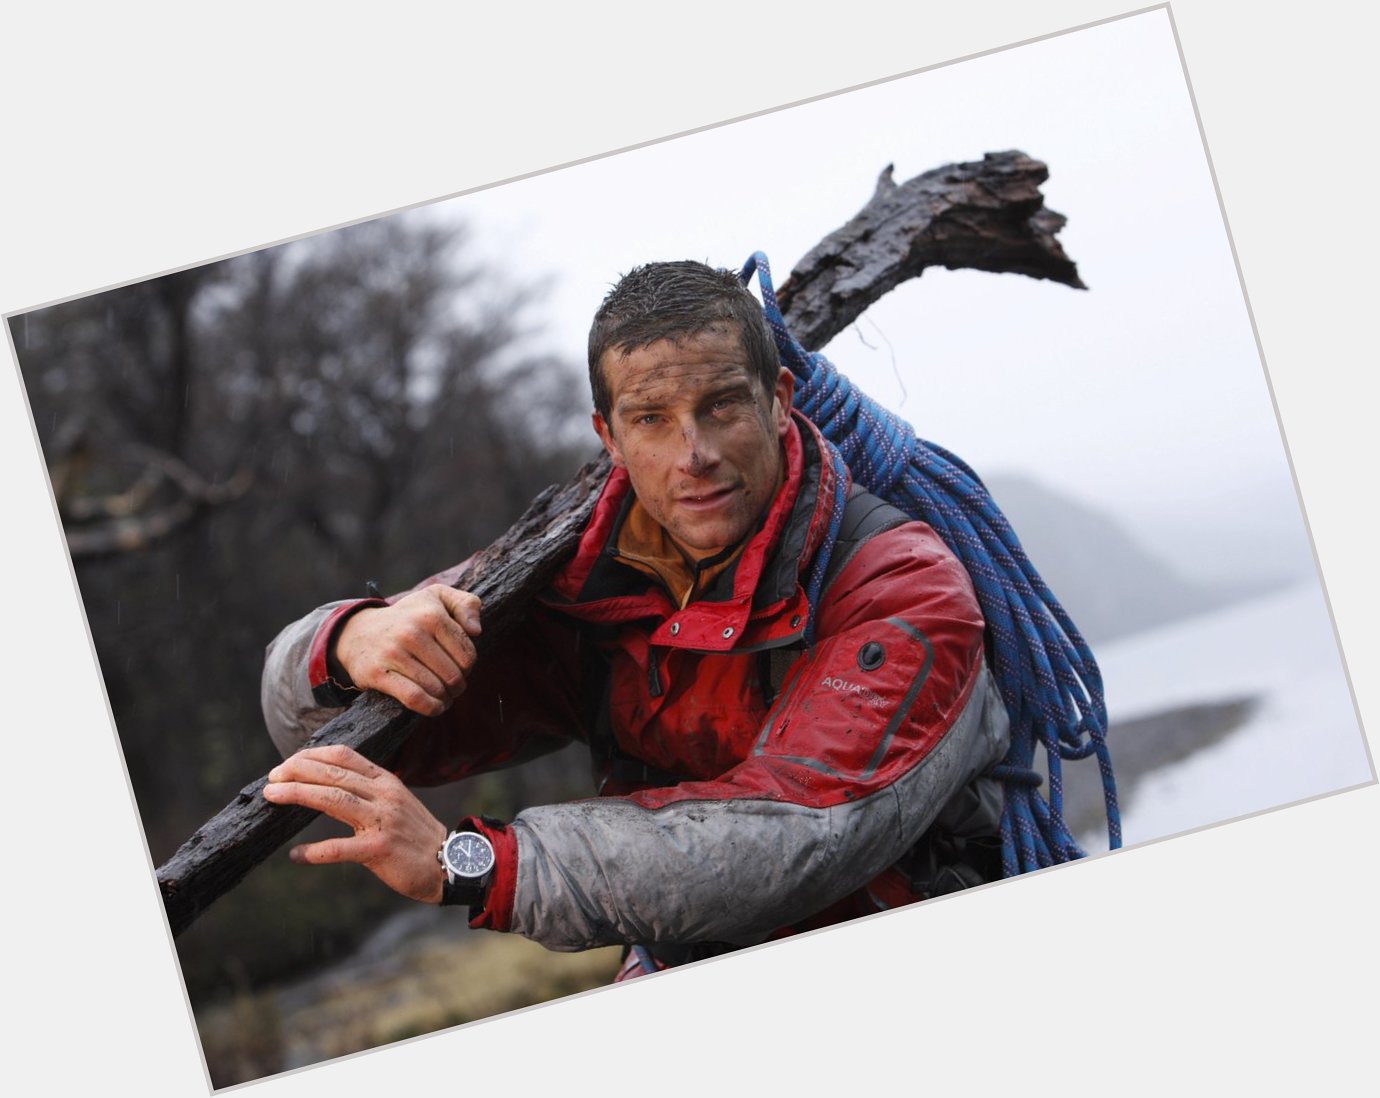 \I m known to Christ\: Bear Grylls on God and faith - in 7 quotes  